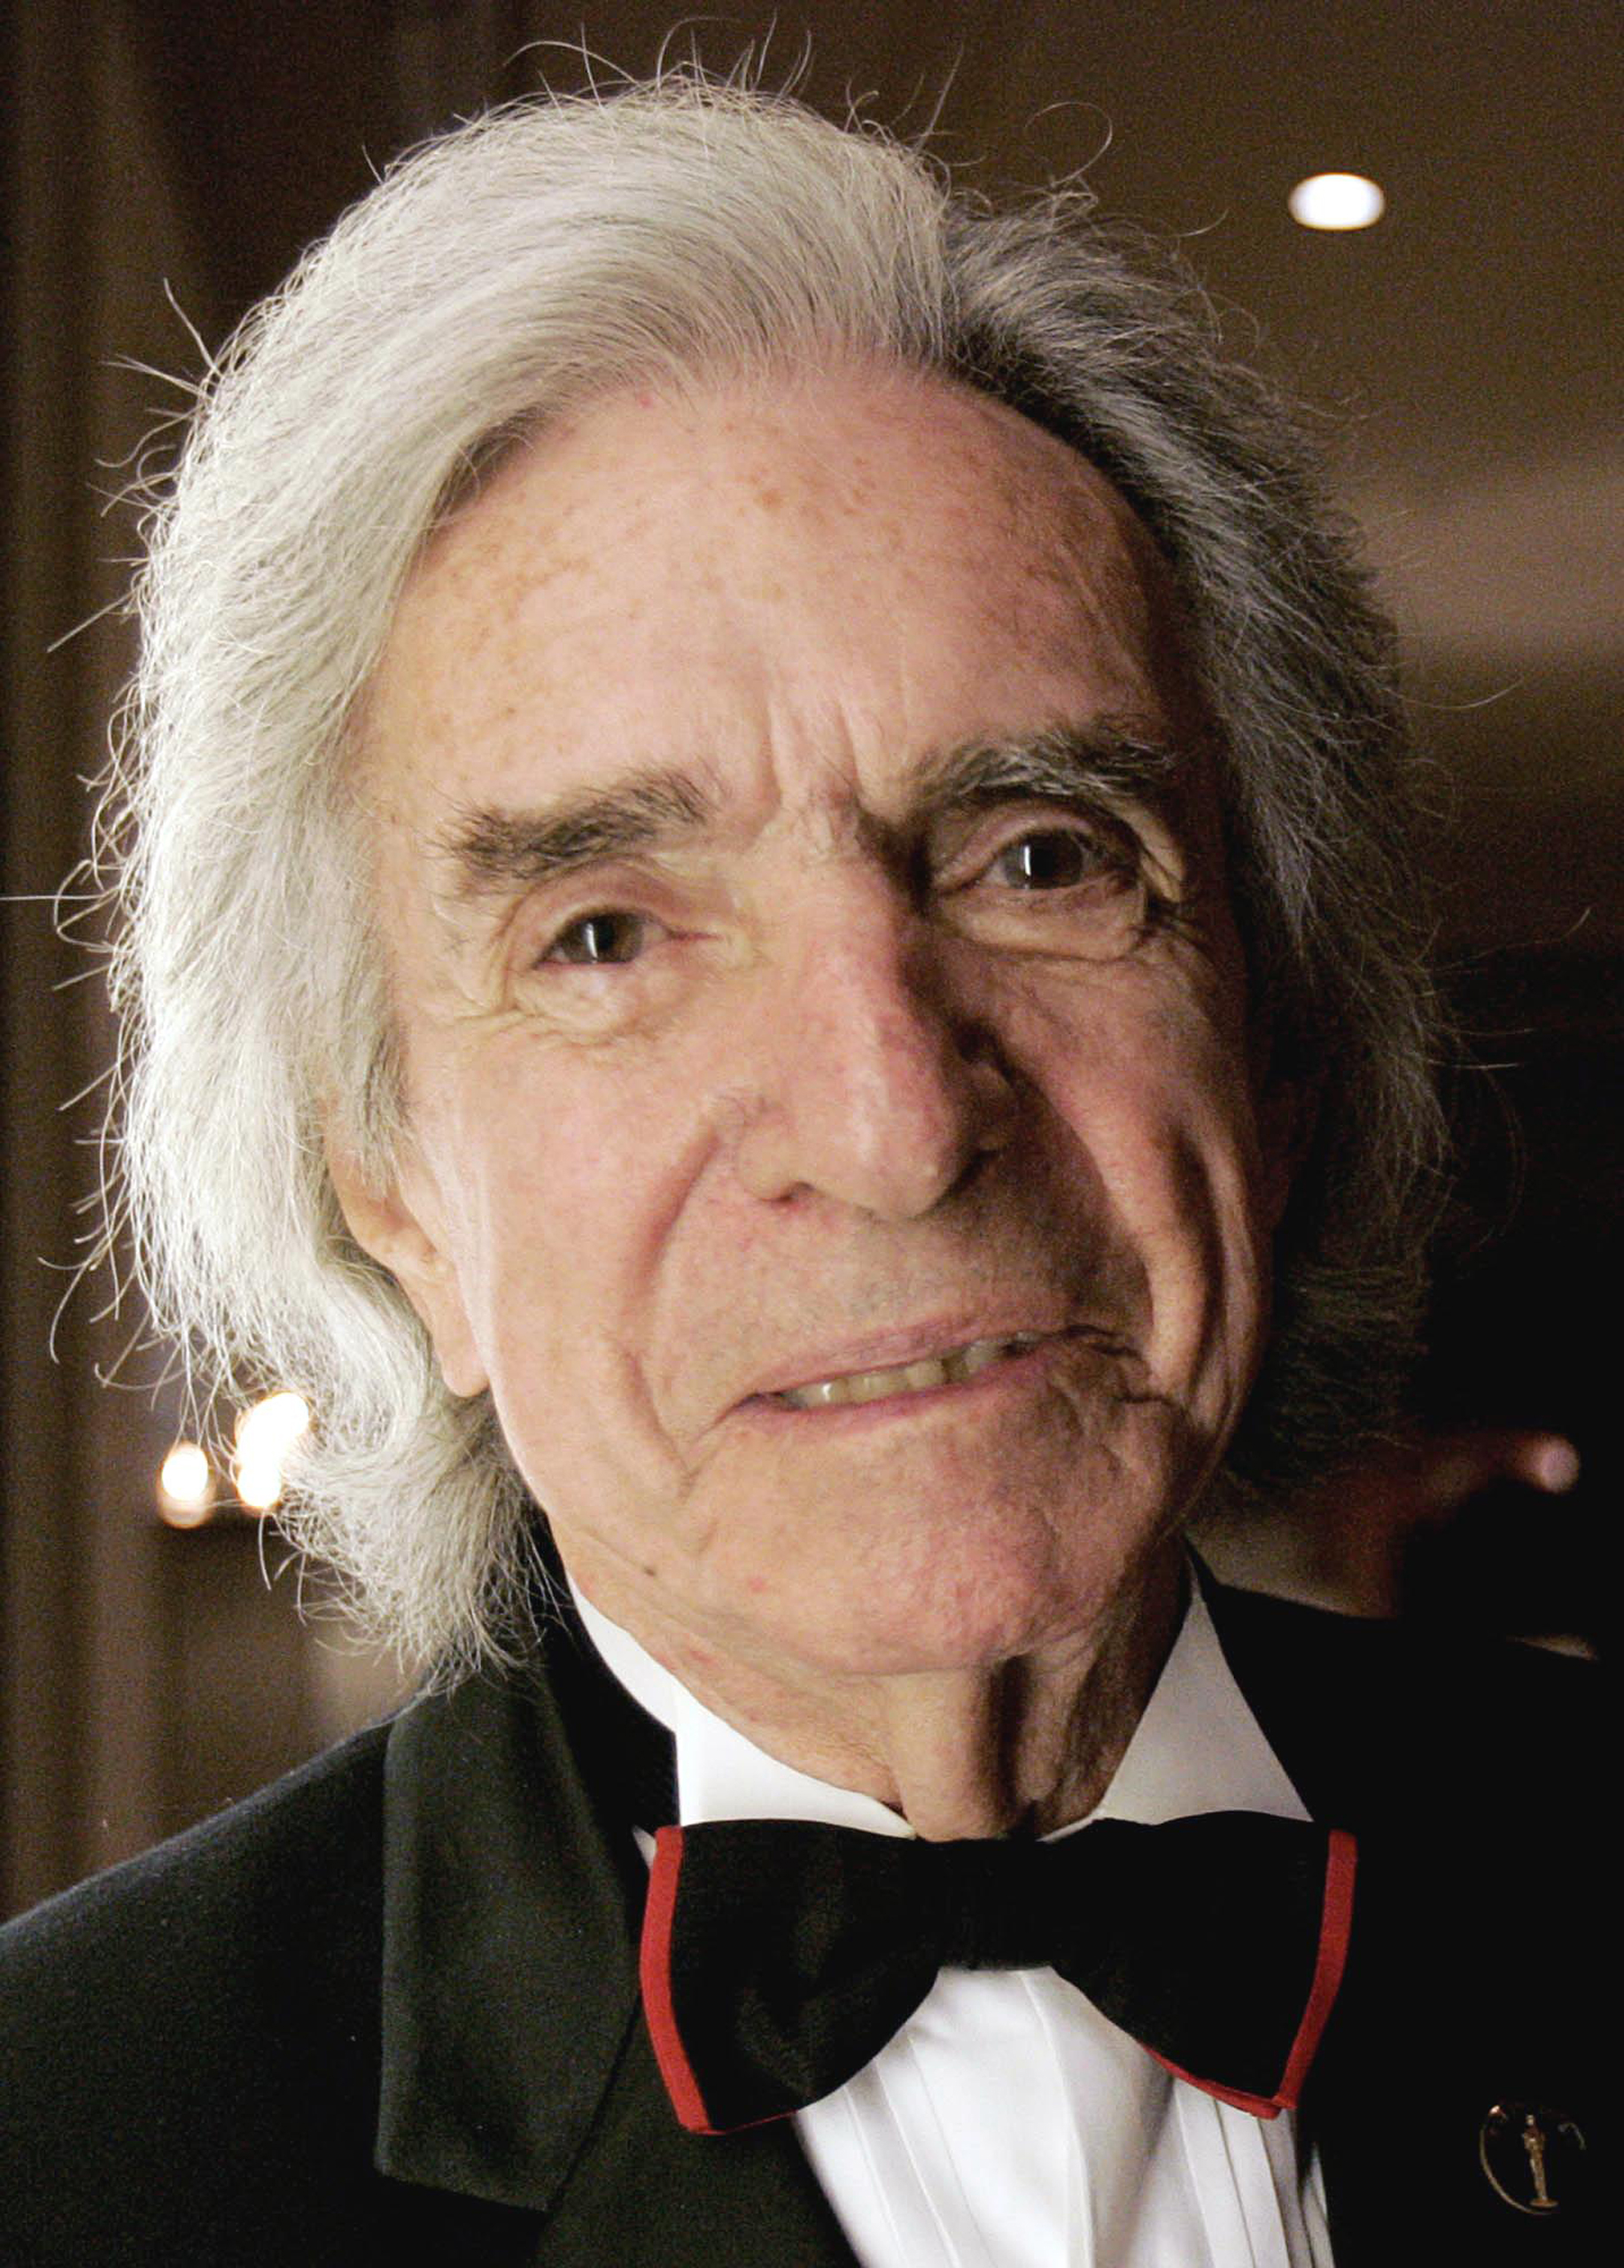 Canadian director Arthur Hiller poses for a photo before the start of the Directors Guild of Canada Award Ceremonies in Toronto on Saturday, Oct. 2, 2004. Hiller received a Lifetime Achievement Award. (aP PHOTO/J.P. Moczulski)